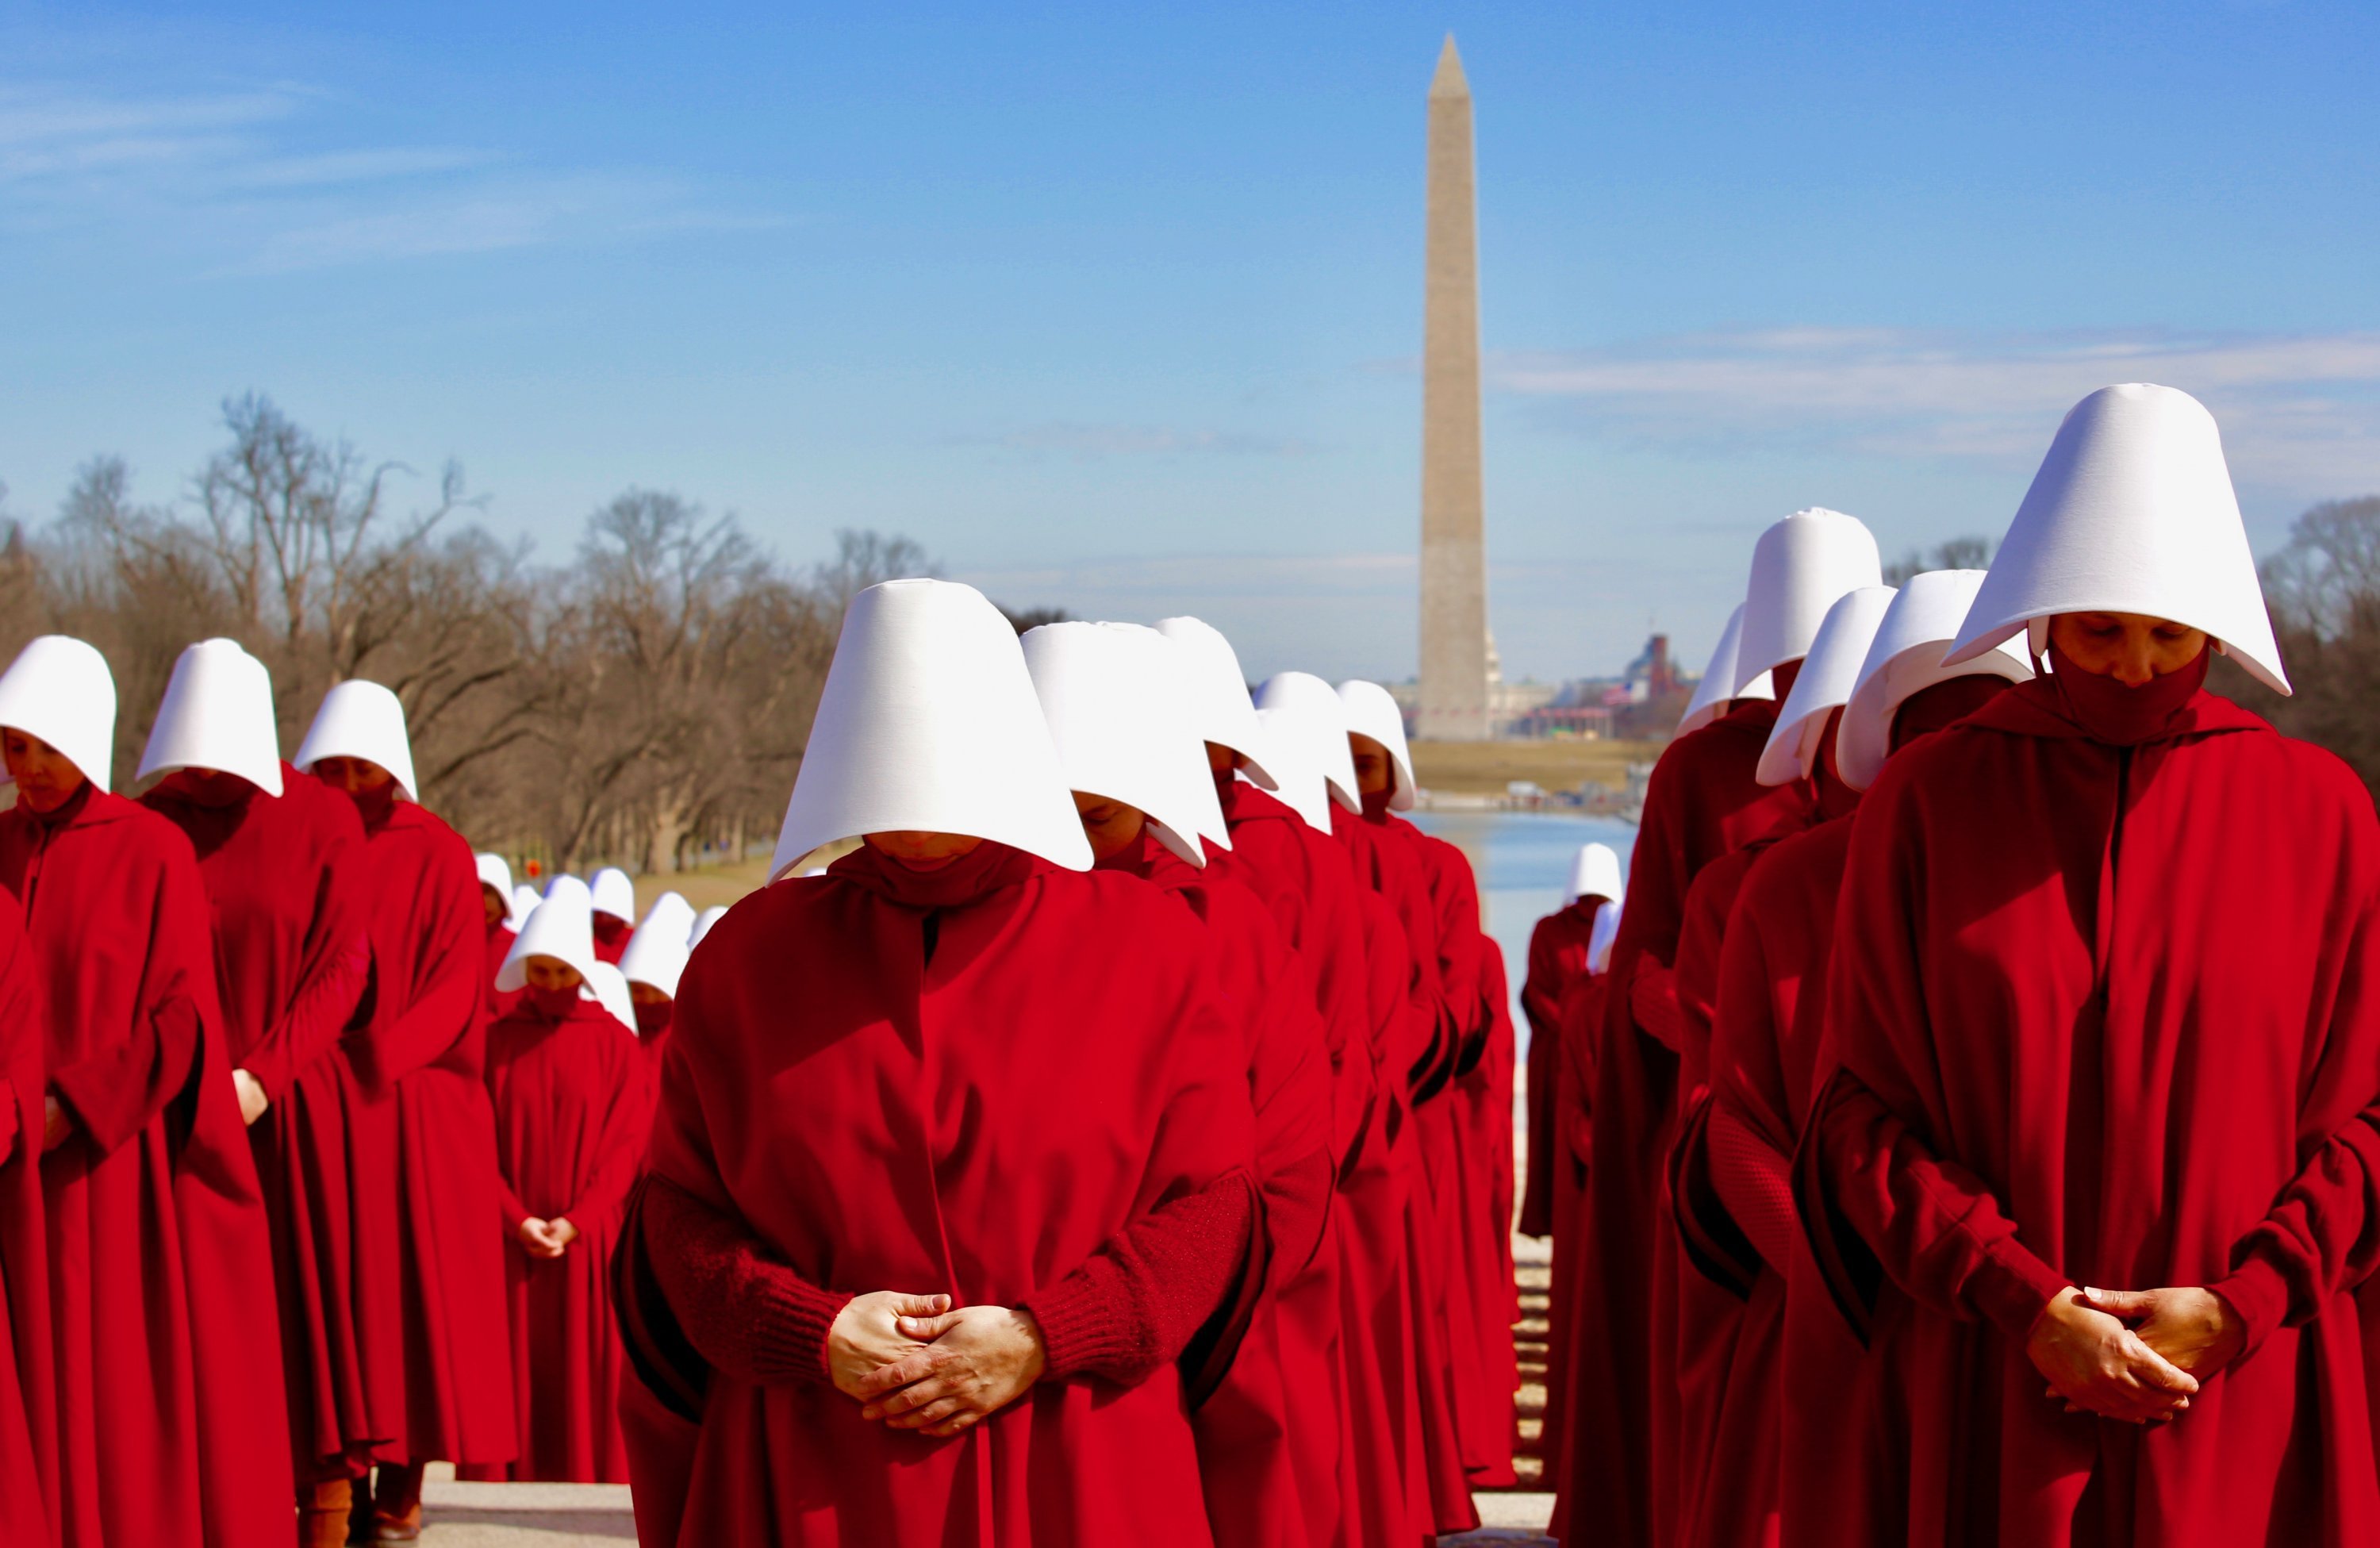 The Handmaids Tale 2019 Wallpapers